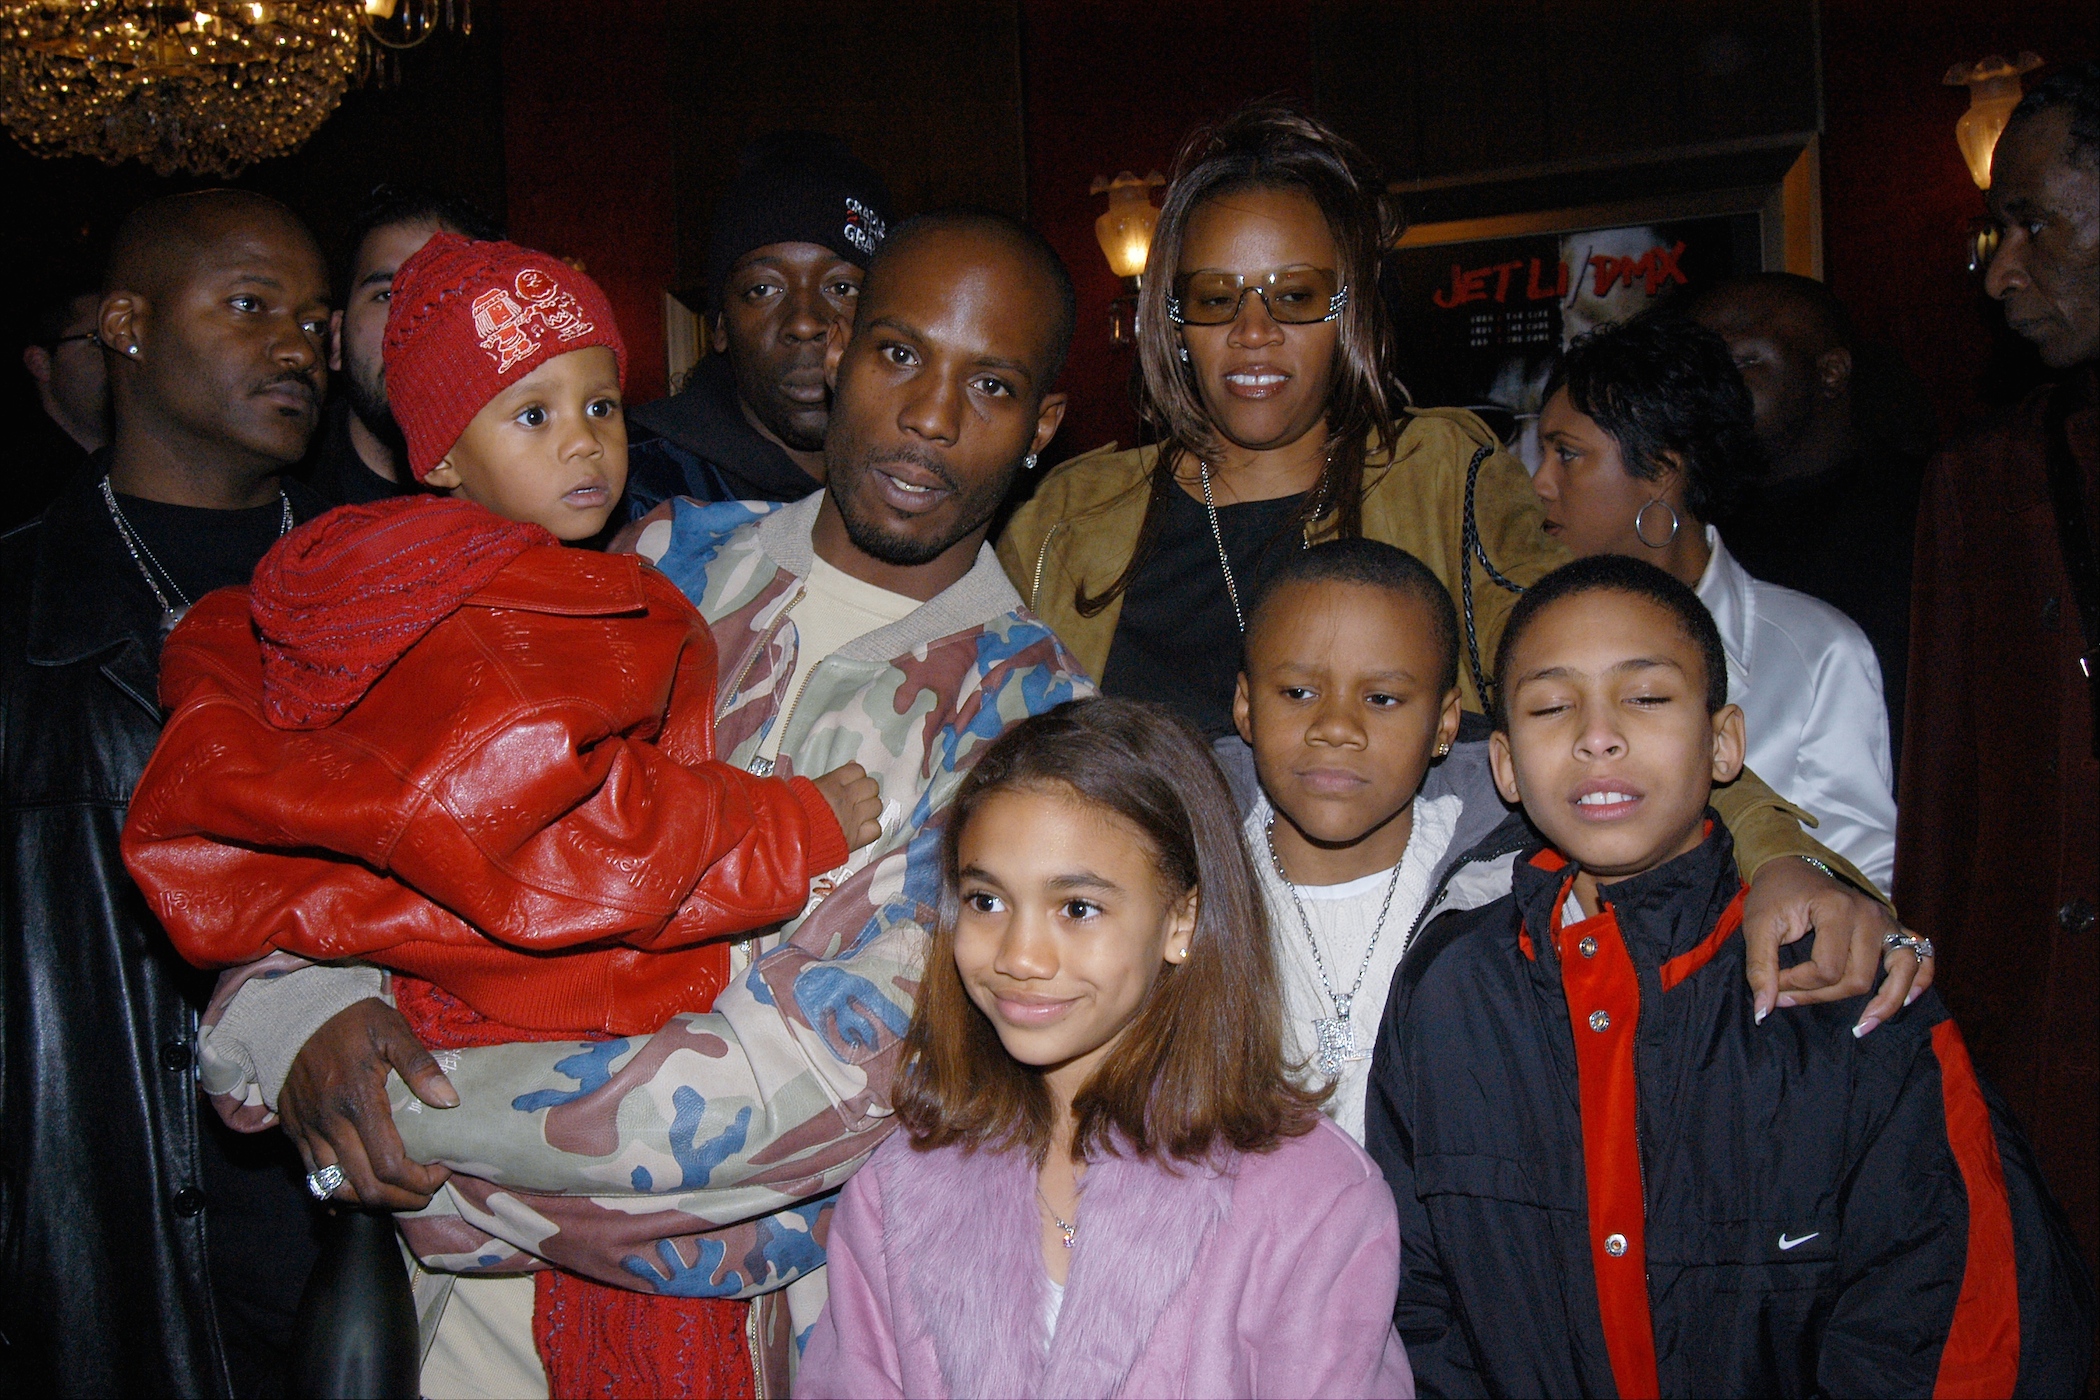 DMX and wife Tashera Simmons with their four children arriving at a movie premiere